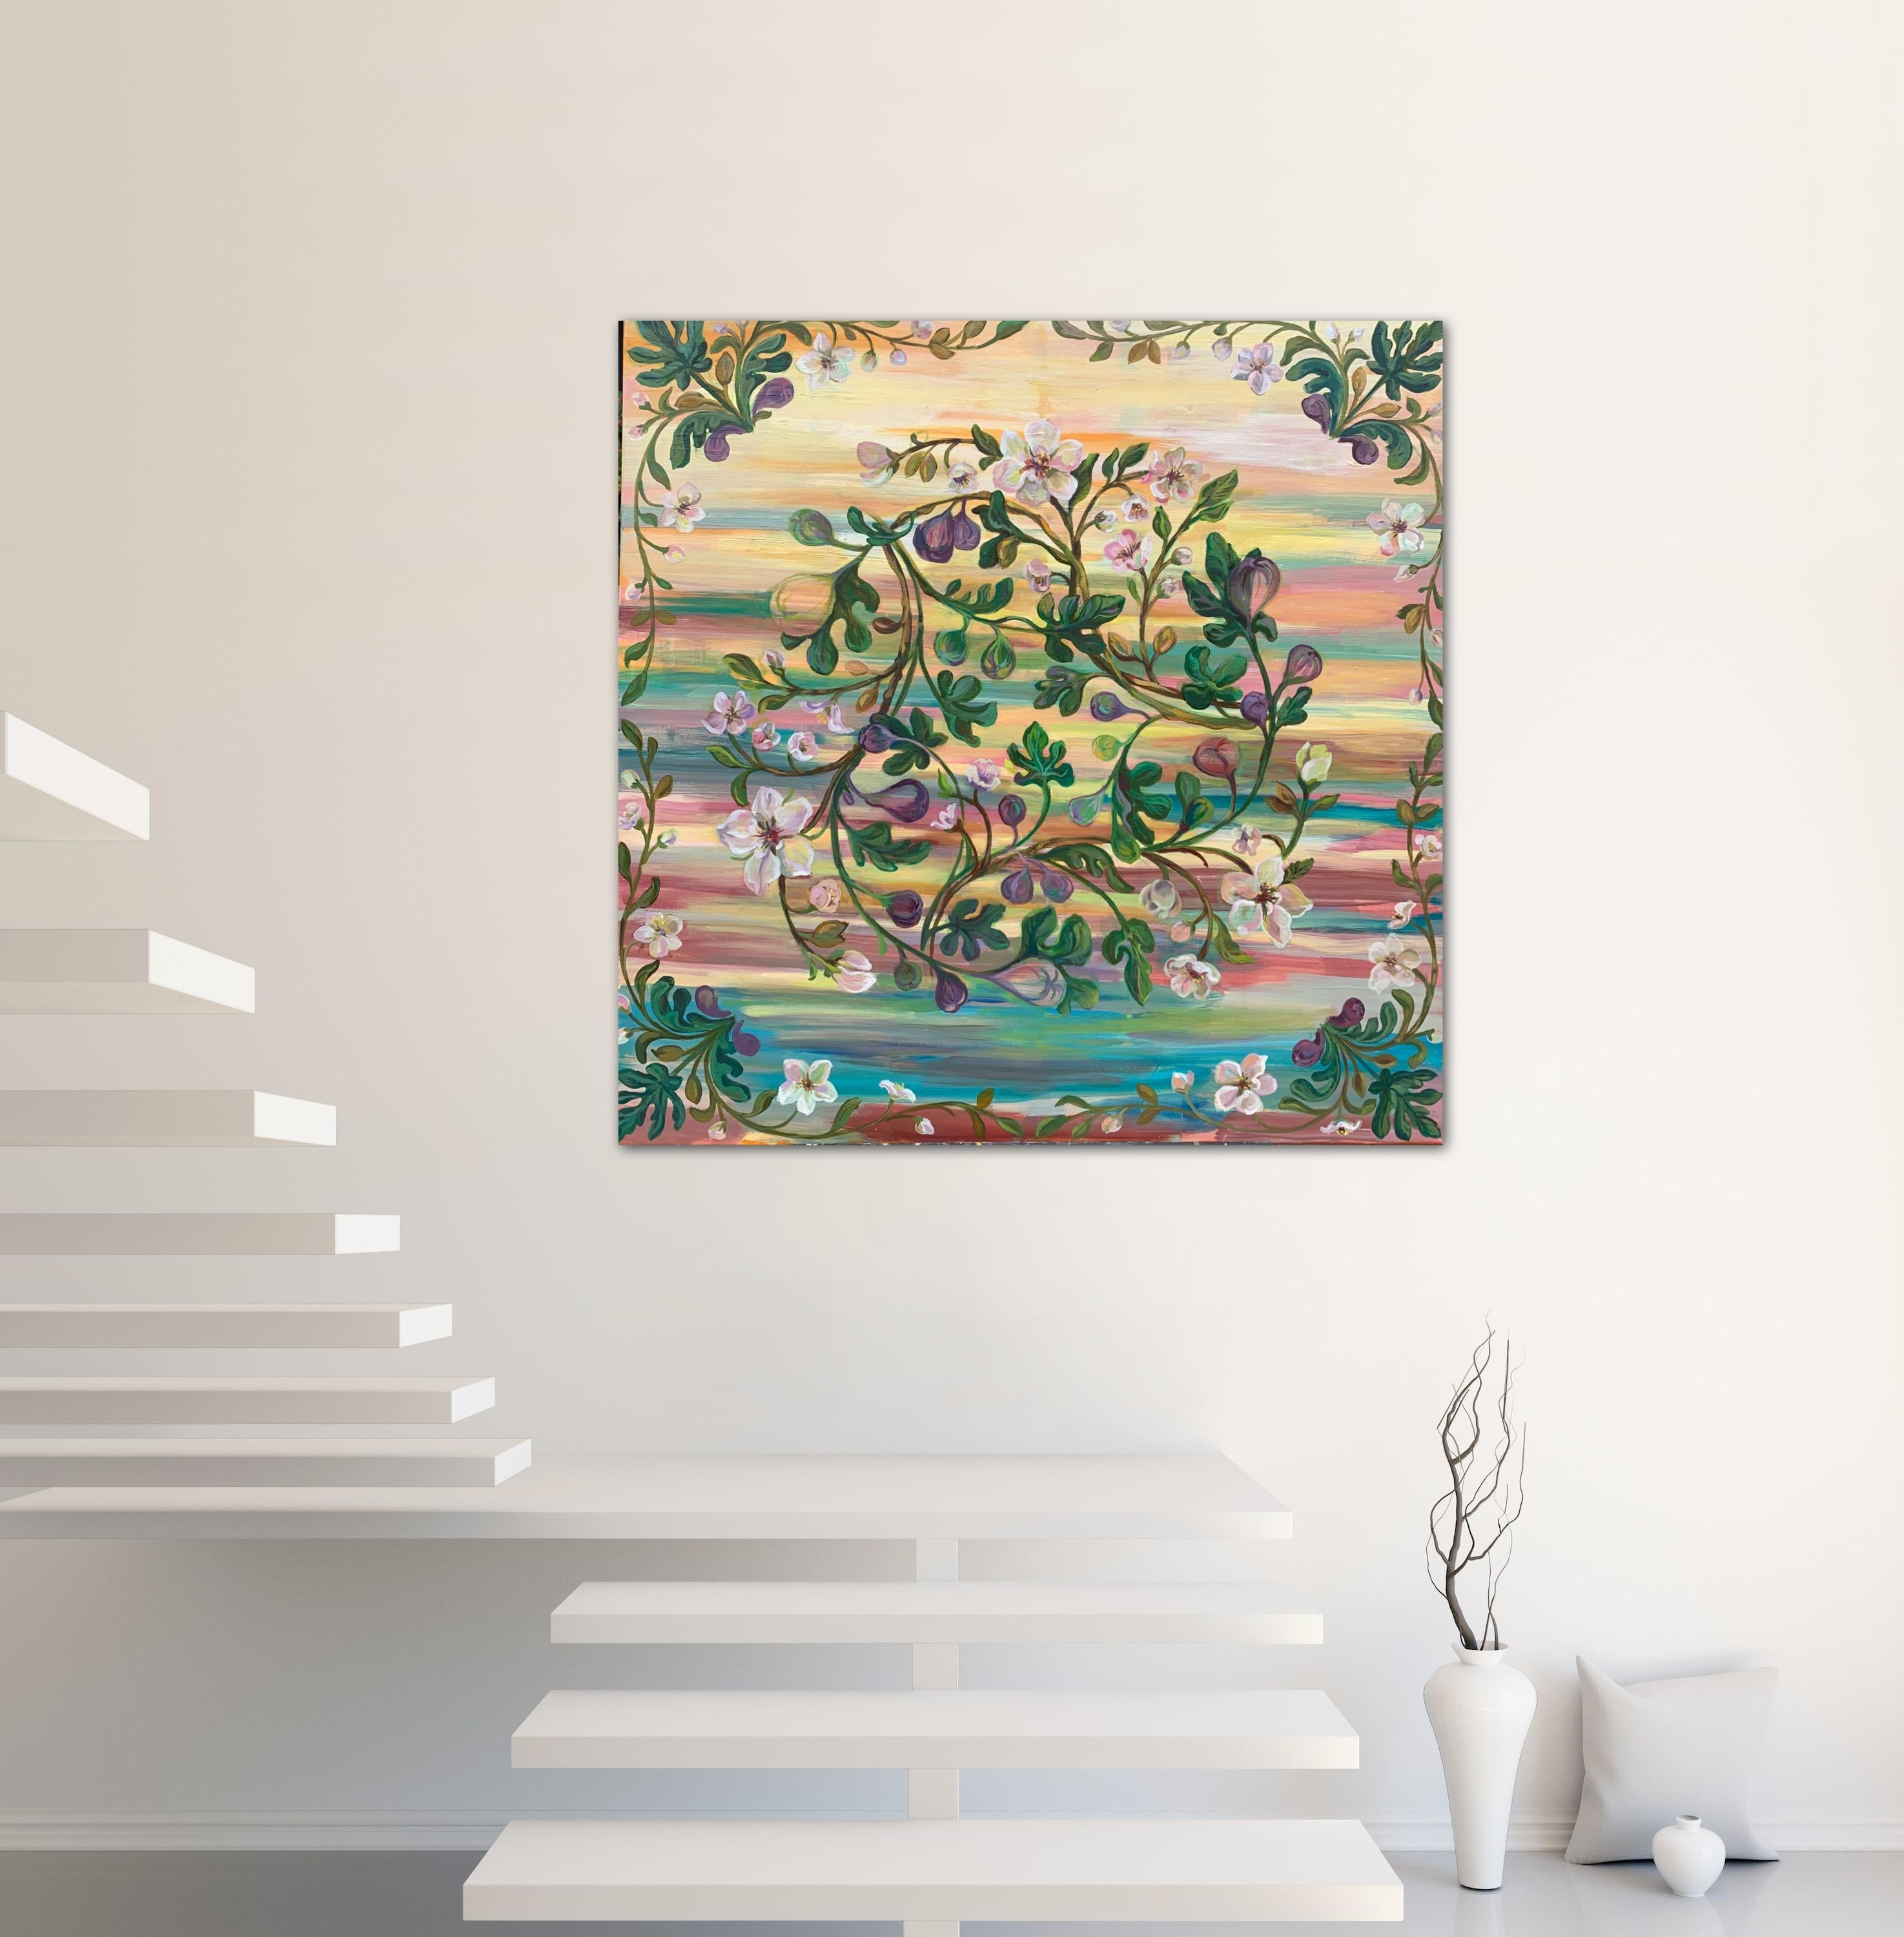 Bright colors of almond, fig blossom presented in a decorative style in a circular composition

- Original oil painting
- 100x100 cm (39.4 x 39.4 inch)
- 1.5 inch thick galley wrapped painted edges - no framing necessary.
- wired, signed and ready